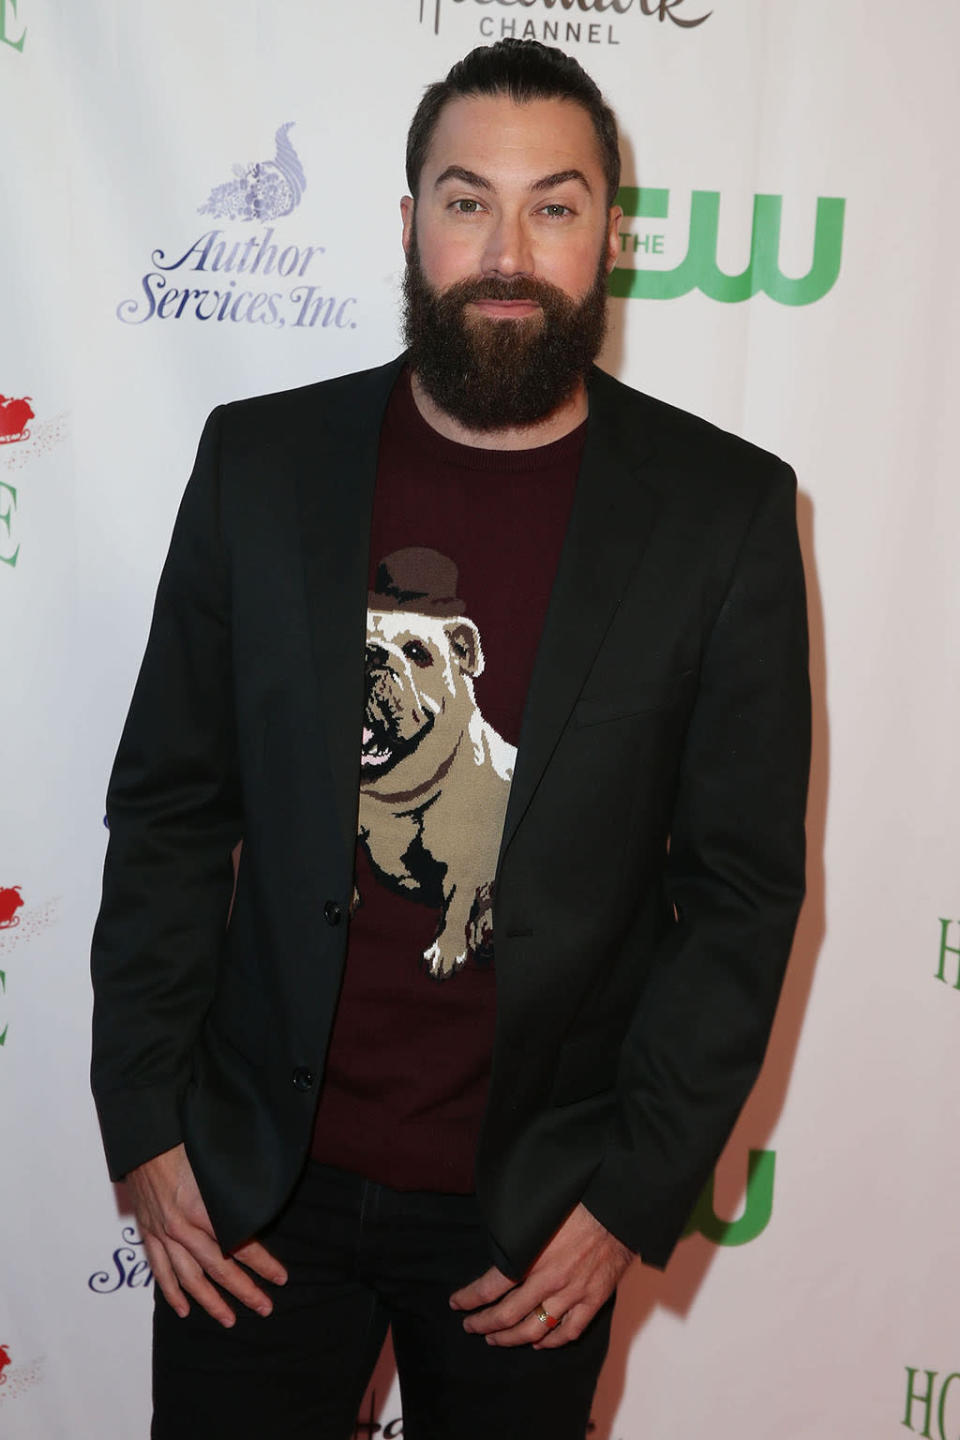 <p><b>Now:</b> He has ditched the long hair and let the stubble take over his face and neck, which is a very of-the-moment look, and Season 3 alum (now wife) Diana DeGarmo must be a fan.<br></p><p><i>(Photo: Getty Images)</i><br></p>